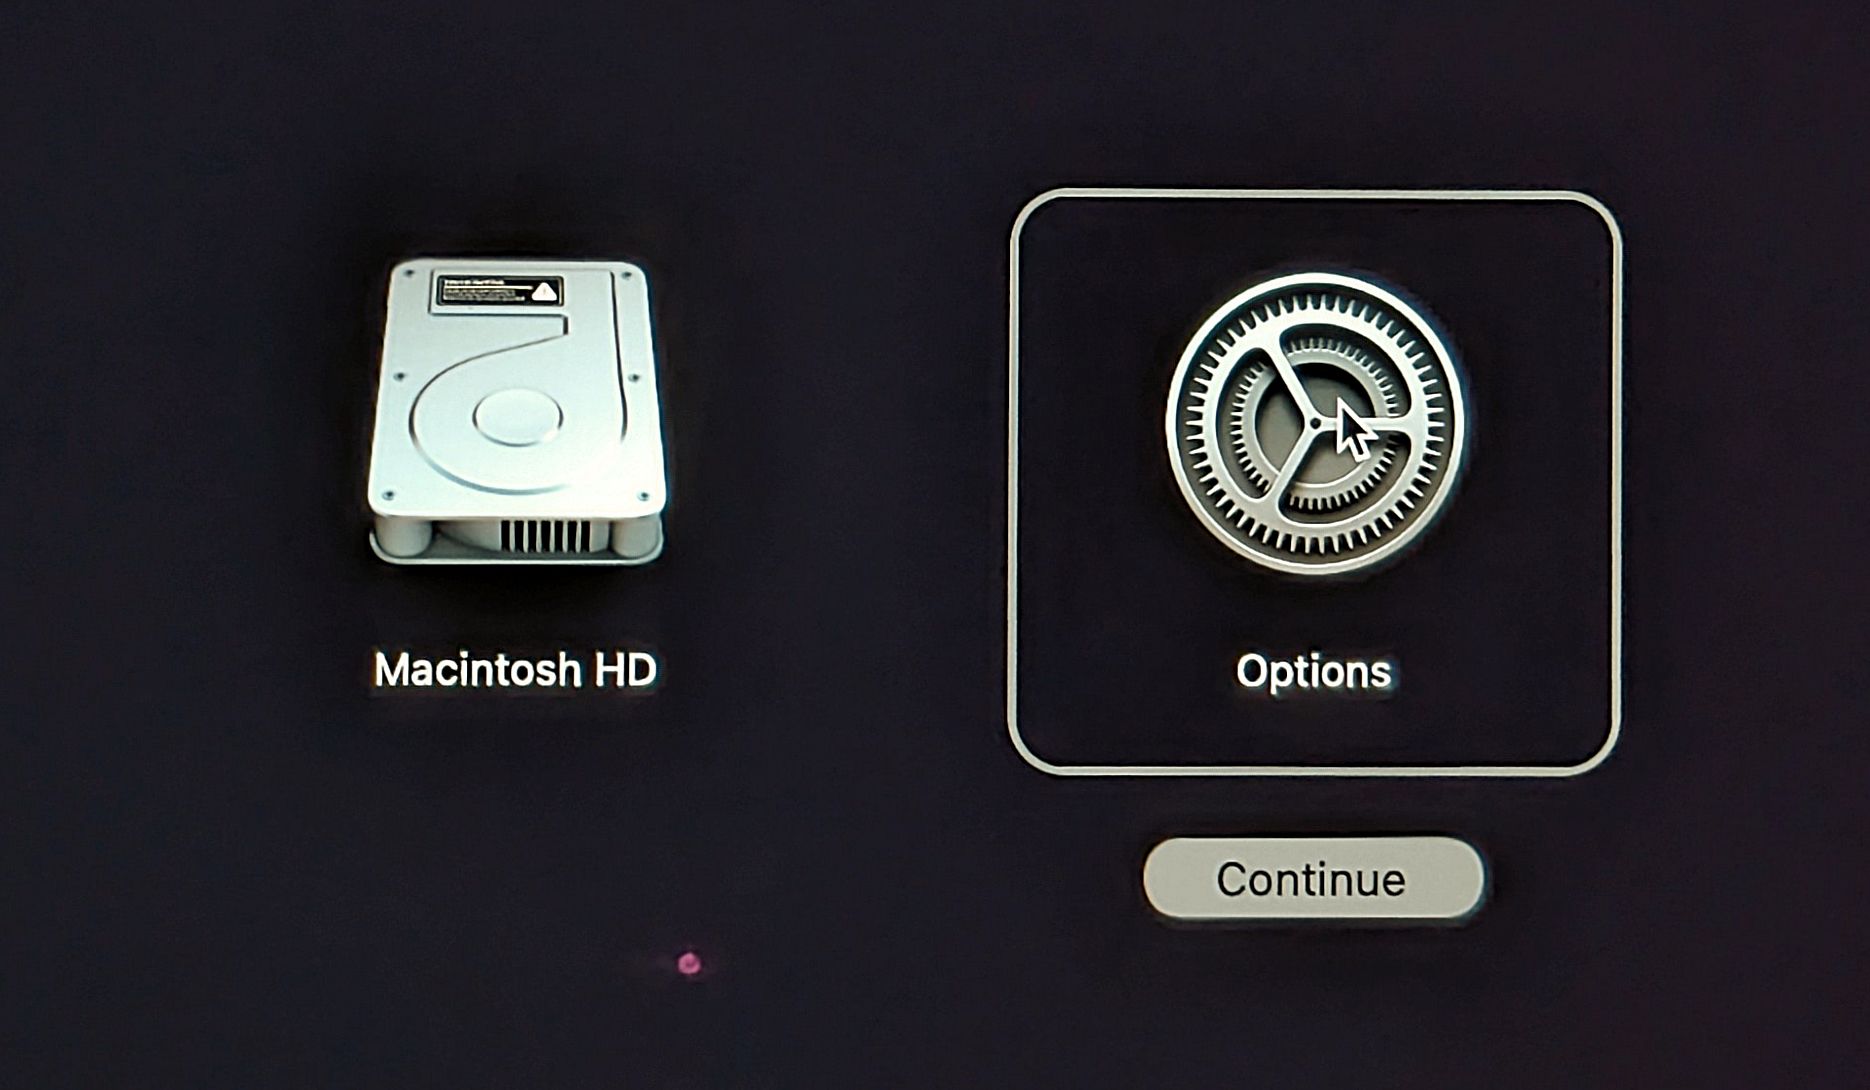 The Options screen when you launch Recovery mode on macOS.